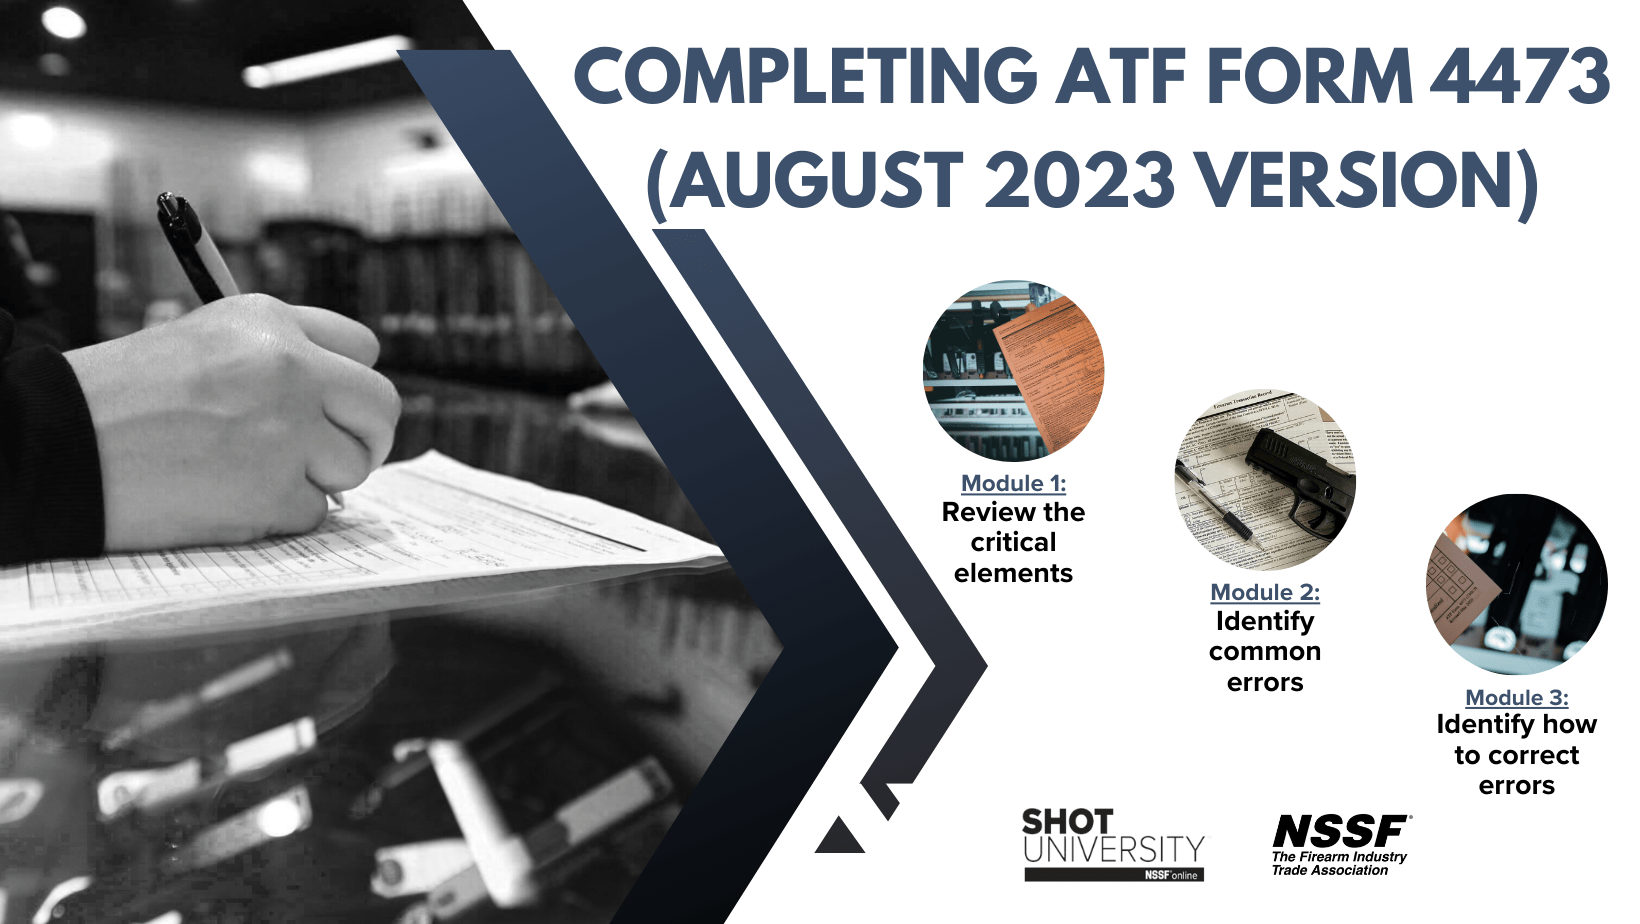 Completing ATF Form 4473